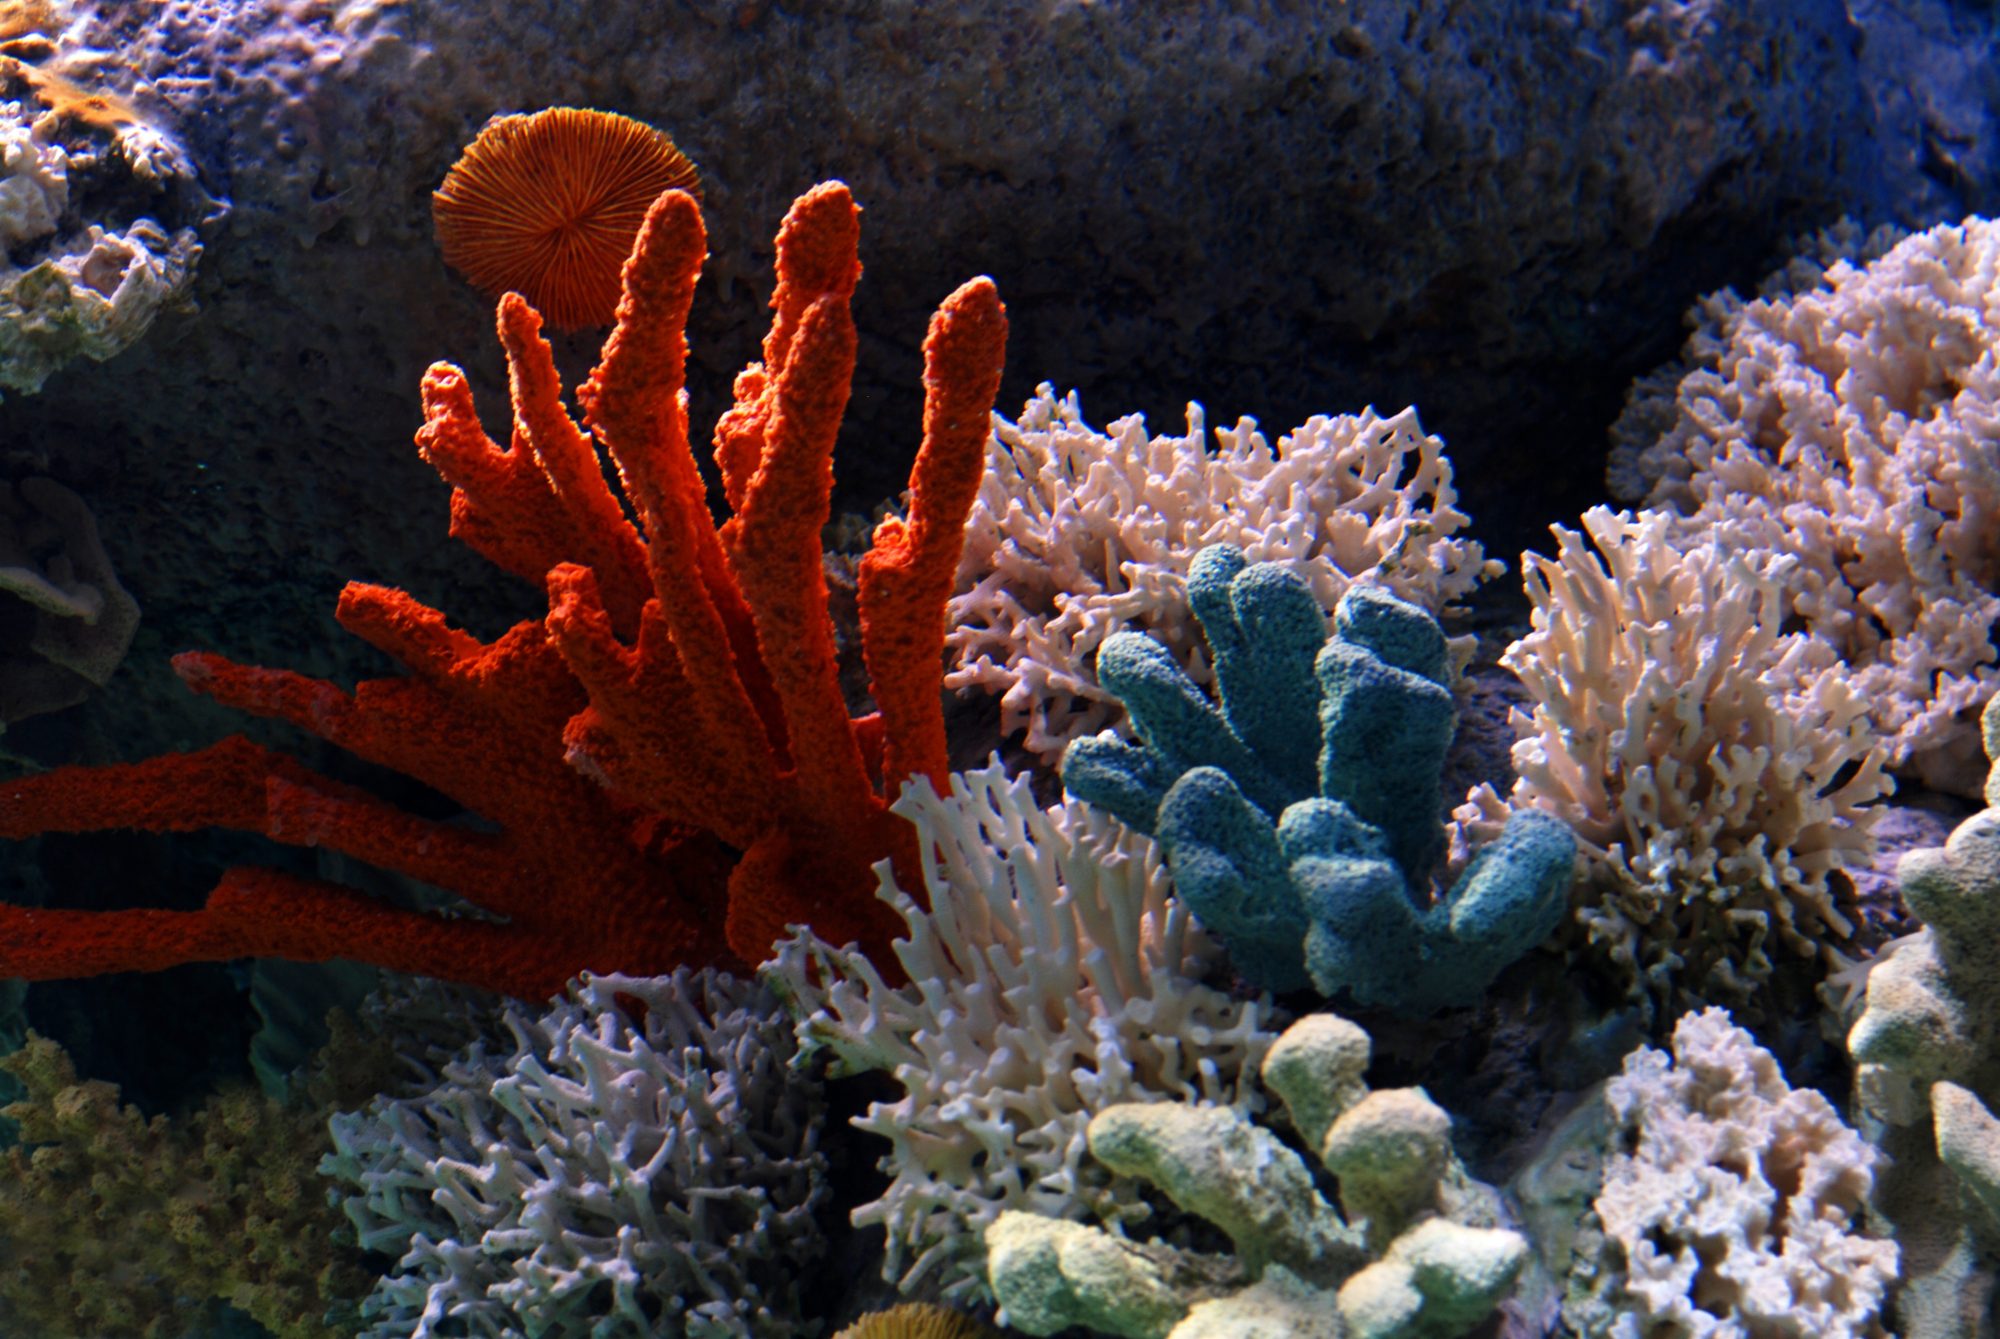 Can environmental genomics help to protect coral?